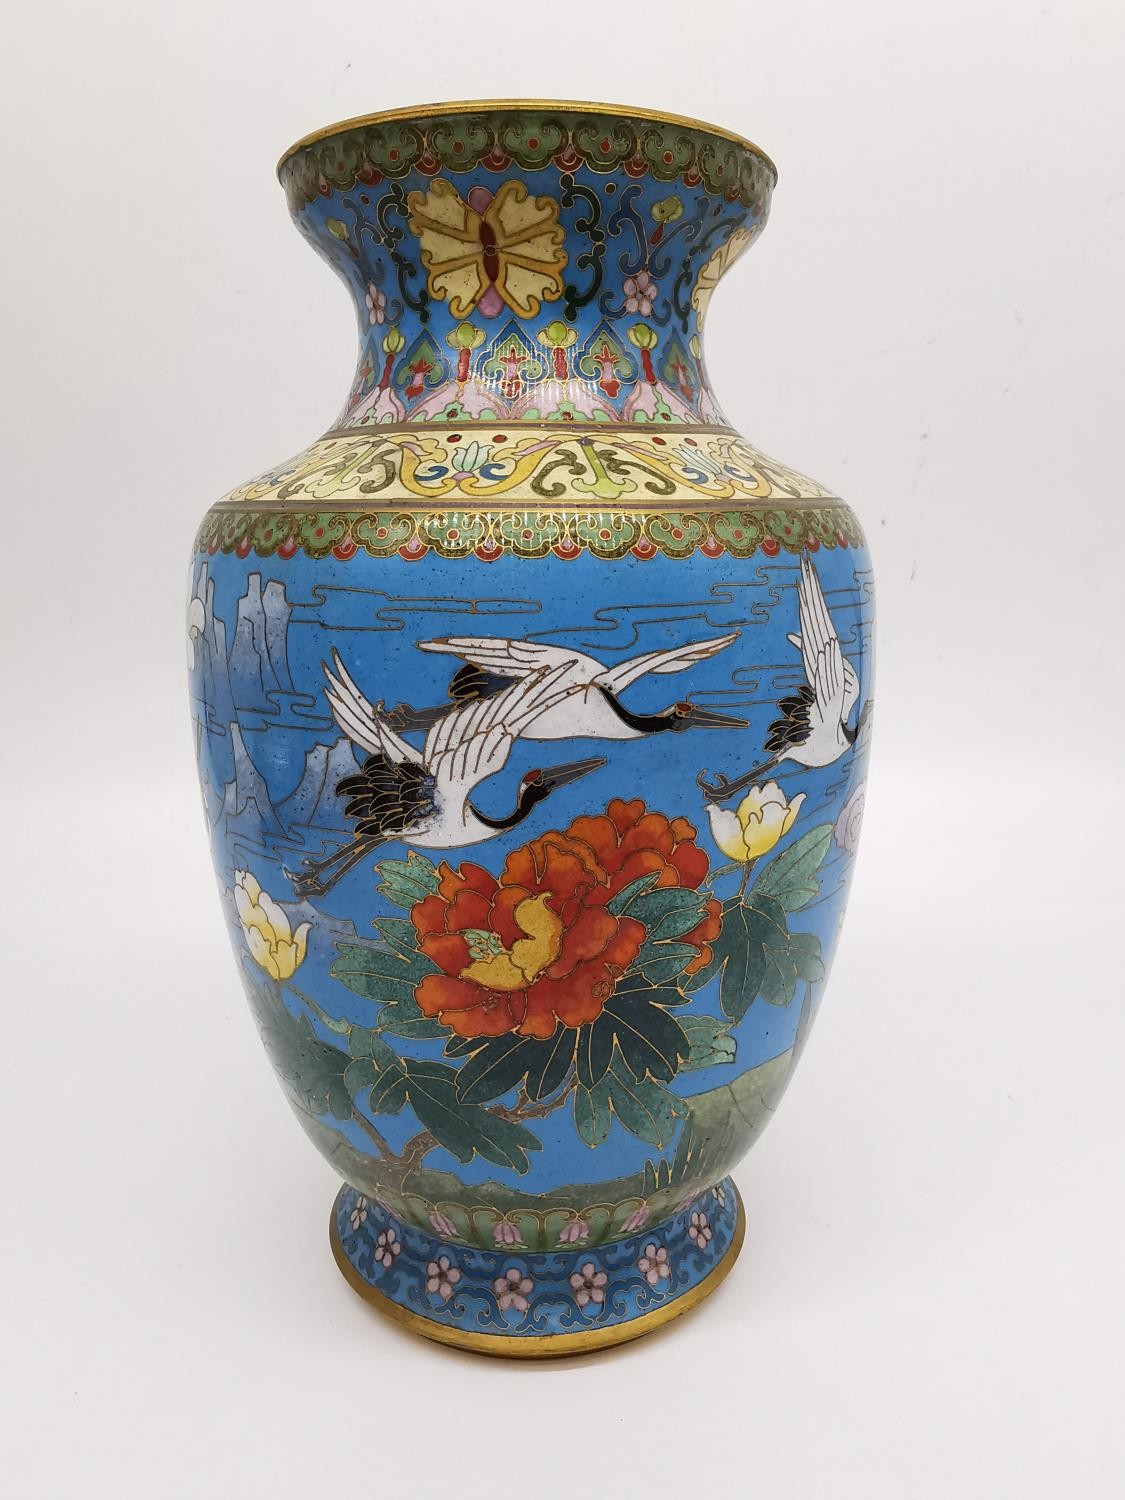 An early 20th century Chinese cloisonné enamel gilt bronze vase with crane, peony and cherry blossom - Image 3 of 9